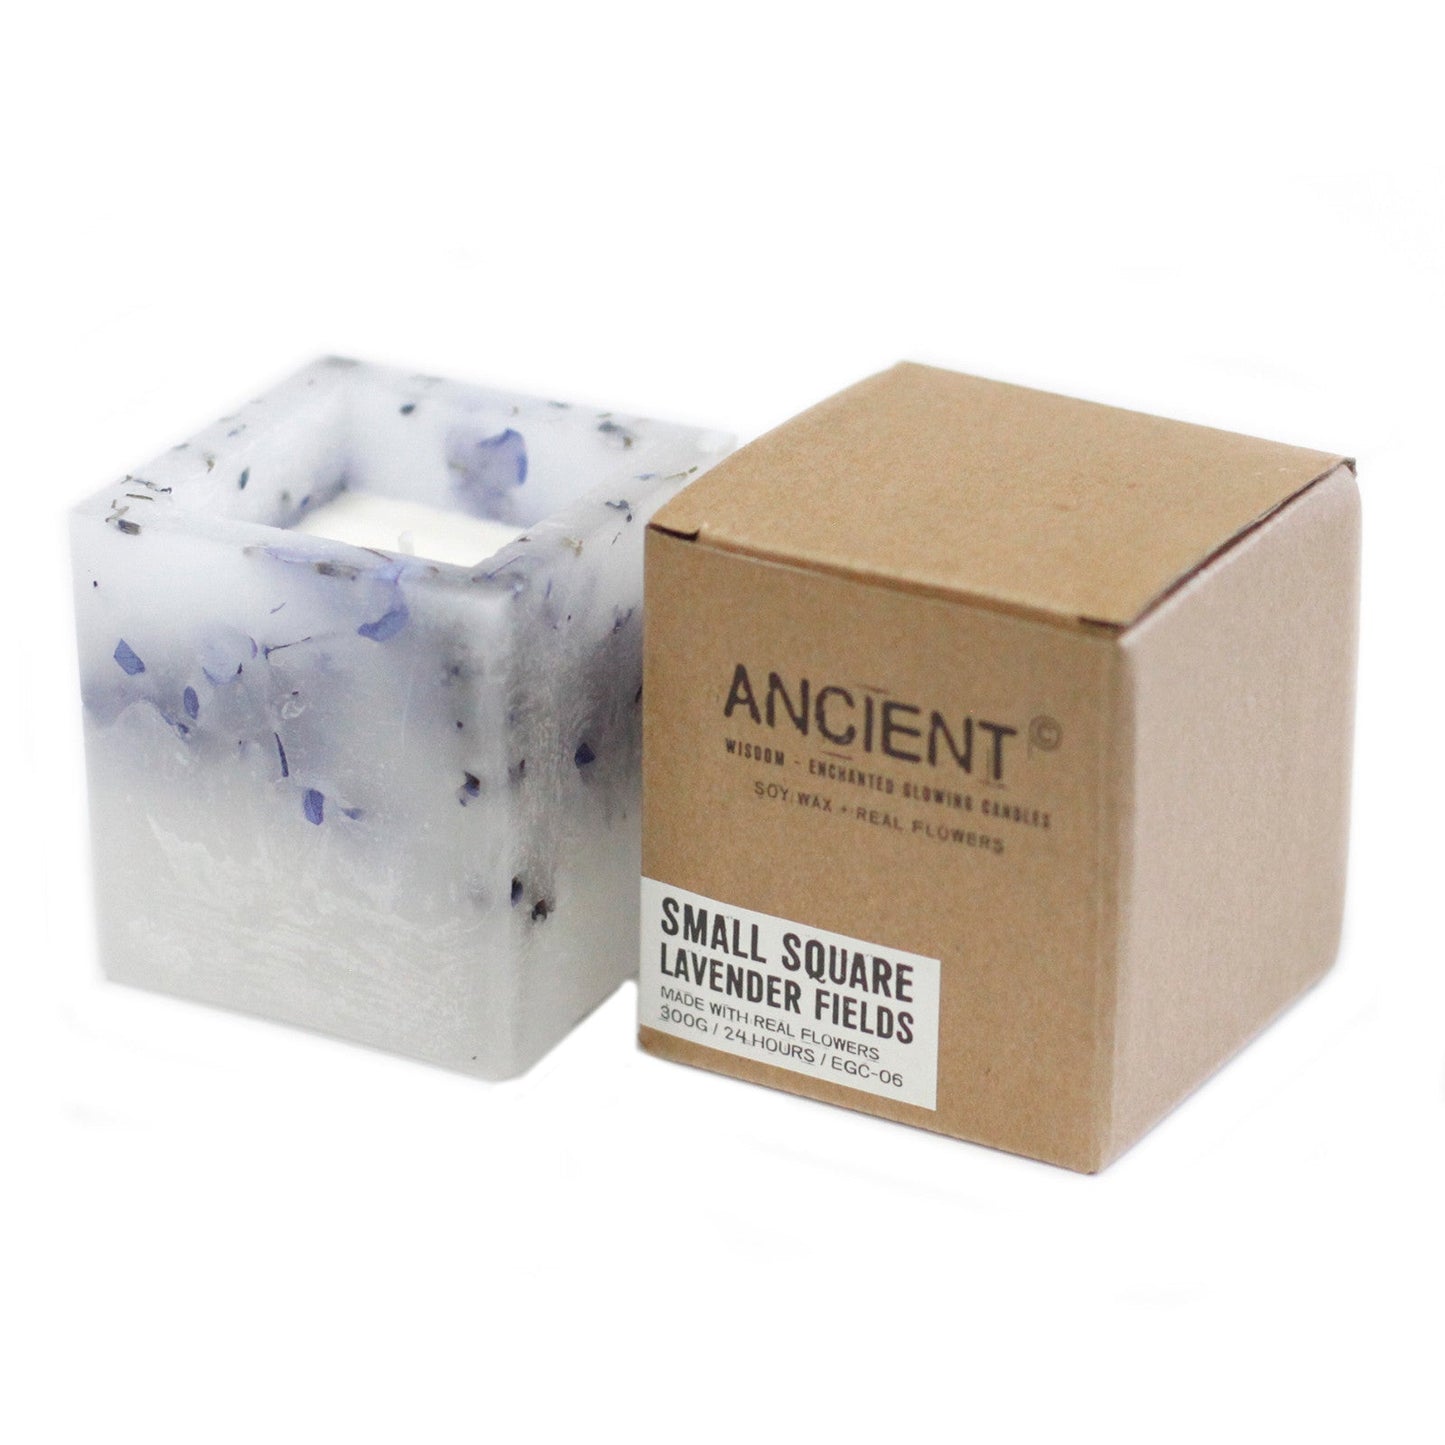 Enchanted Glowing Candles Candles Ancient Wisdom Small Square- Lavender 